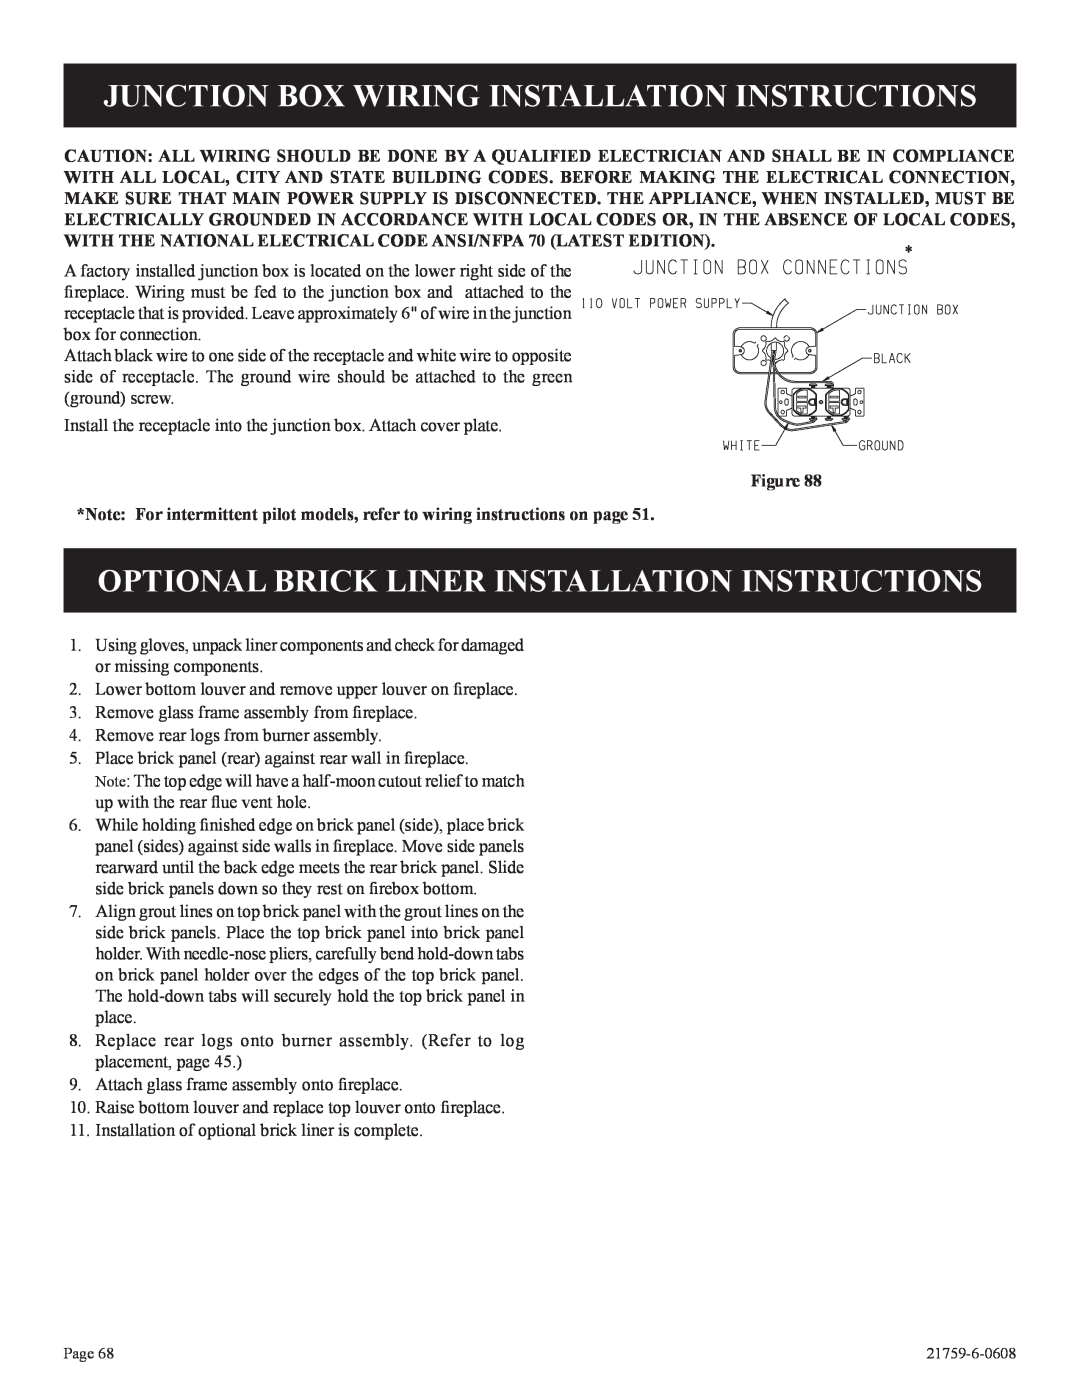 Empire Comfort Systems P)-2 Junction Box Wiring Installation Instructions, Optional Brick Liner Installation Instructions 